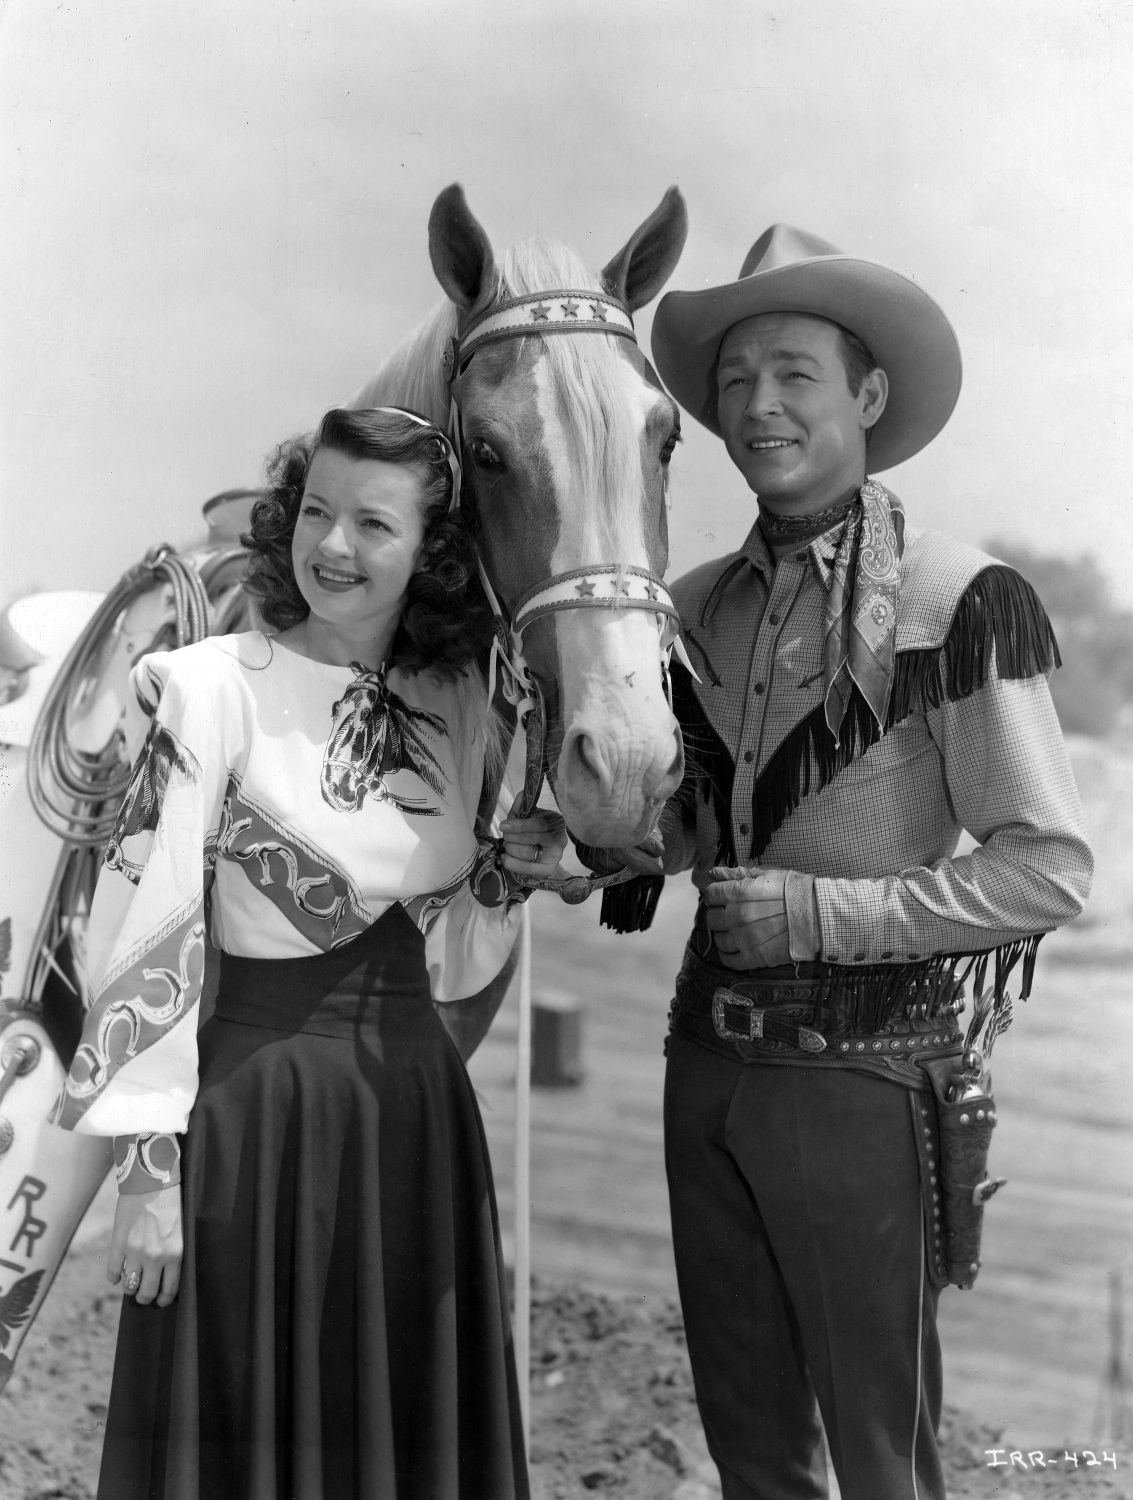 Roy Rogers | King of the Cowboys